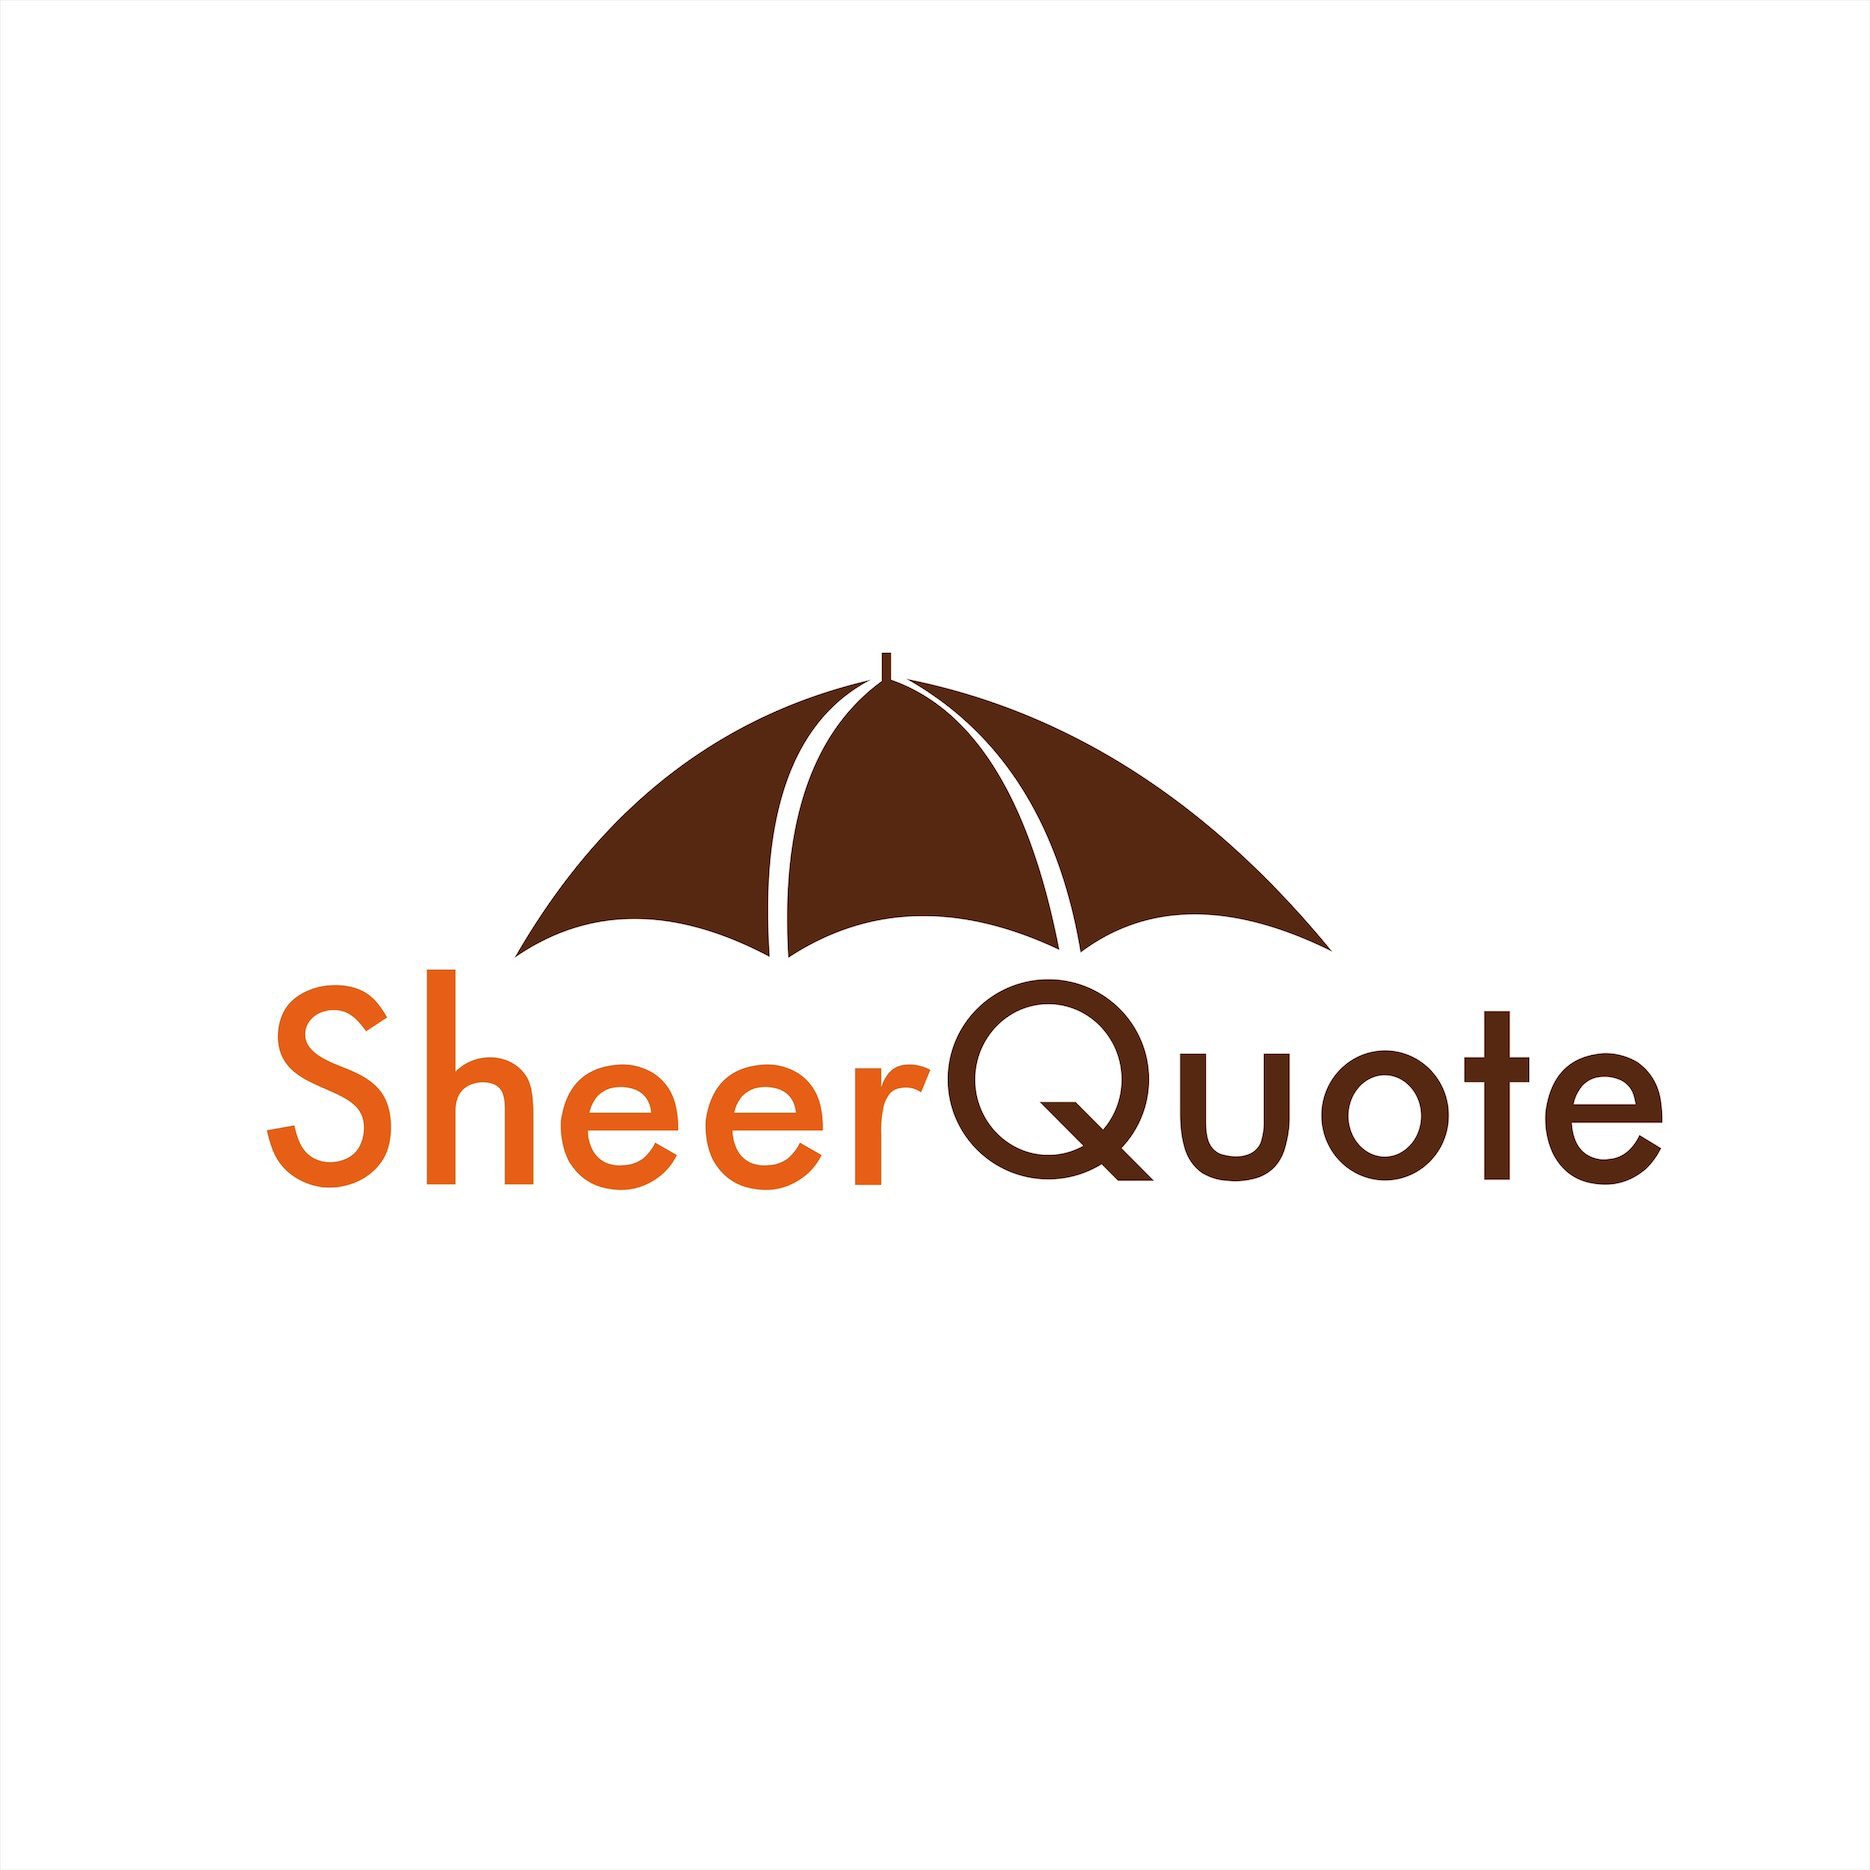 Business logo of SheerQuote